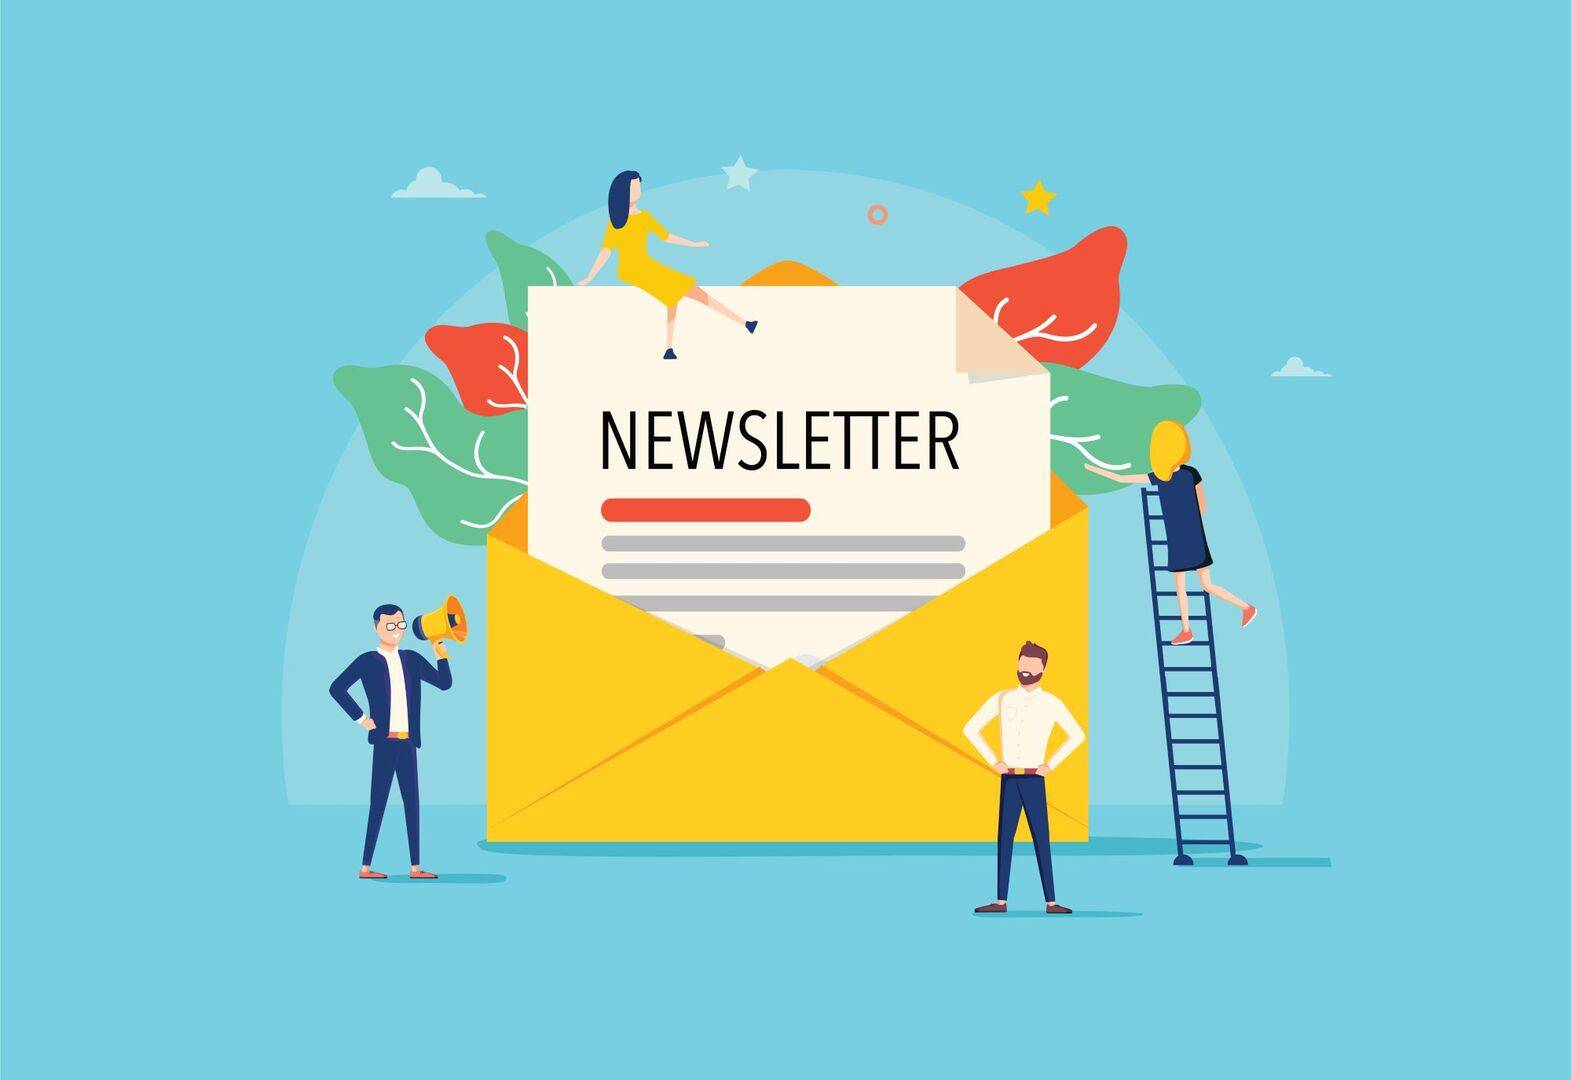 Newsletters that bring conversions